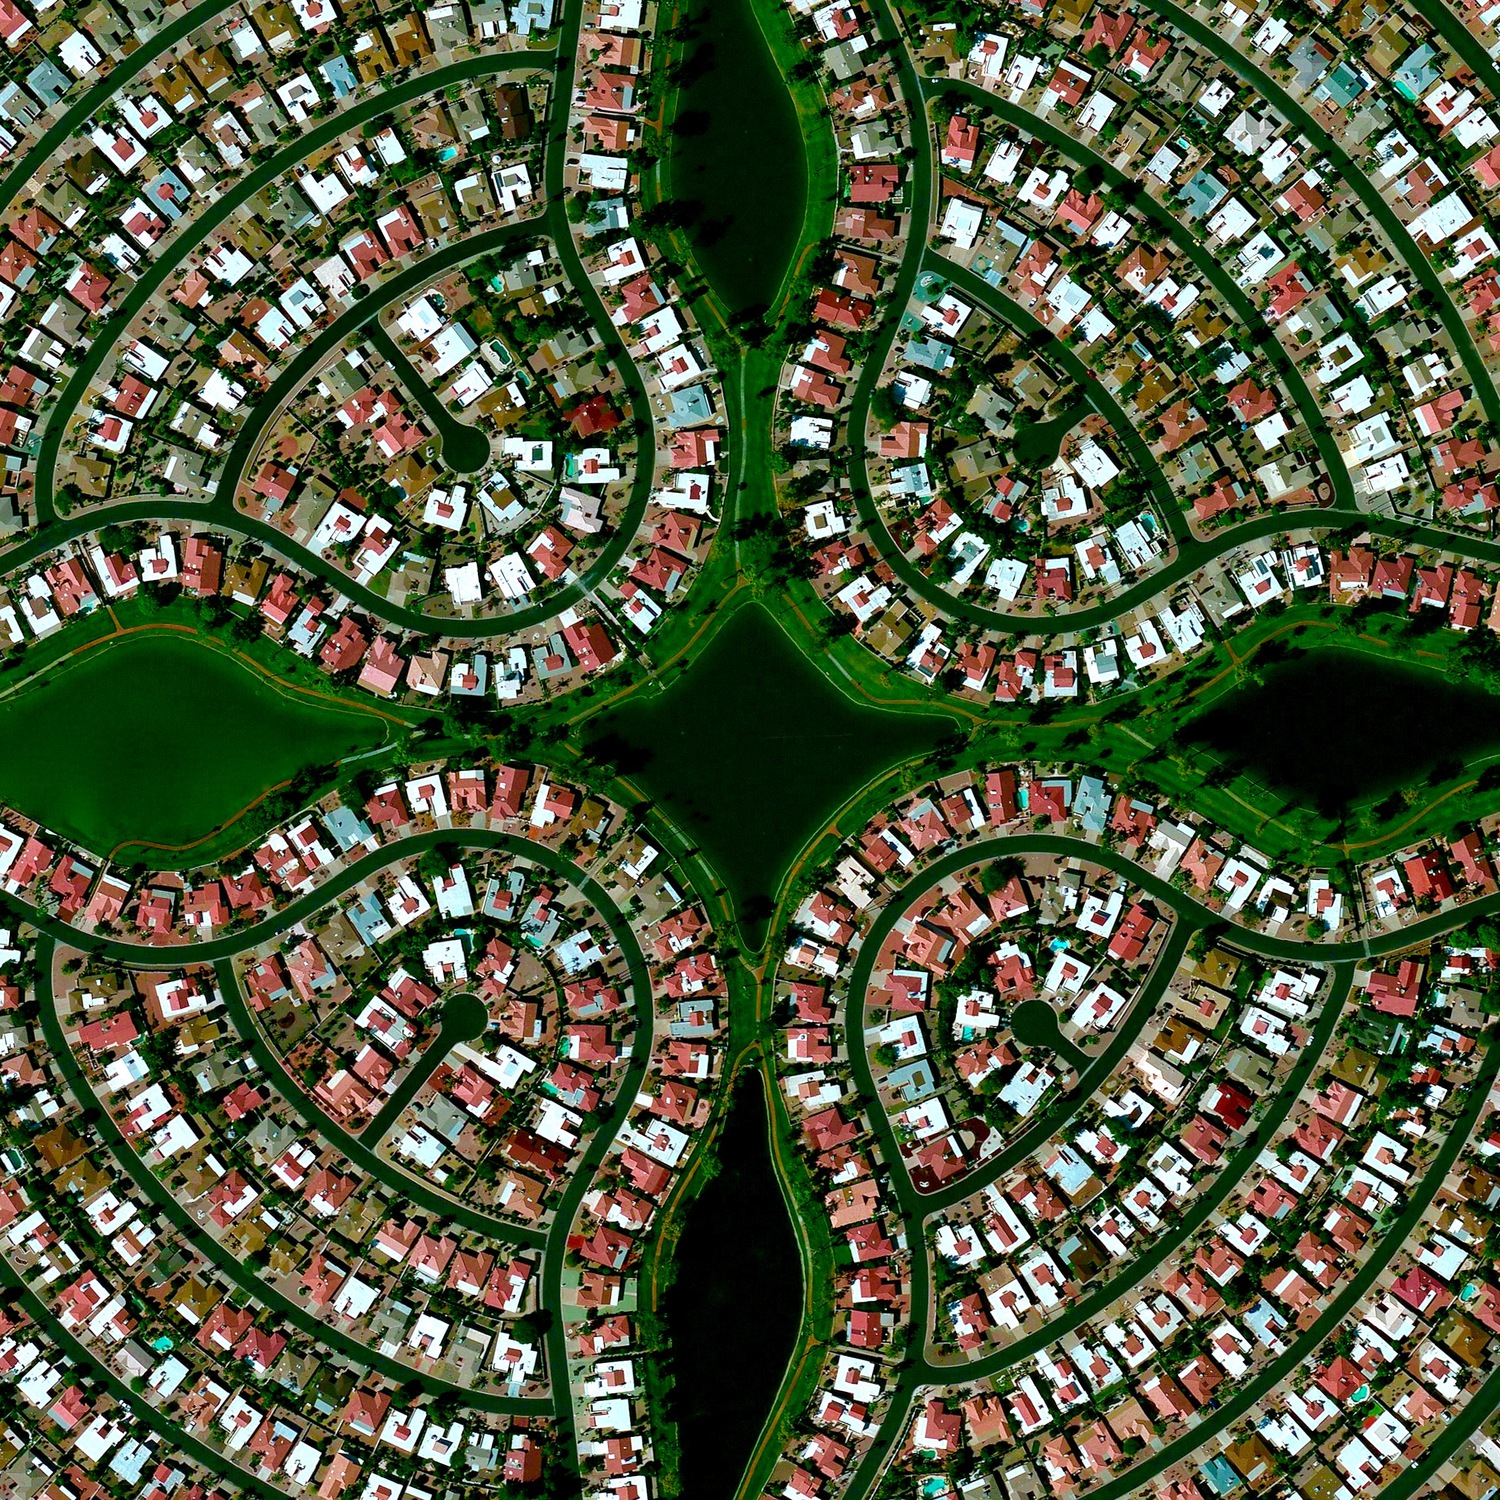   8/10/2015 Sun Lakes Sun Lakes, Arizona 33.209006502°, -111.867132413°   Sun Lakes, Arizona is a planned community with a population of nearly 14,000 residents. According to US census data, only 0.1% of the community's 6,683 households have children under the age of 18 living there.